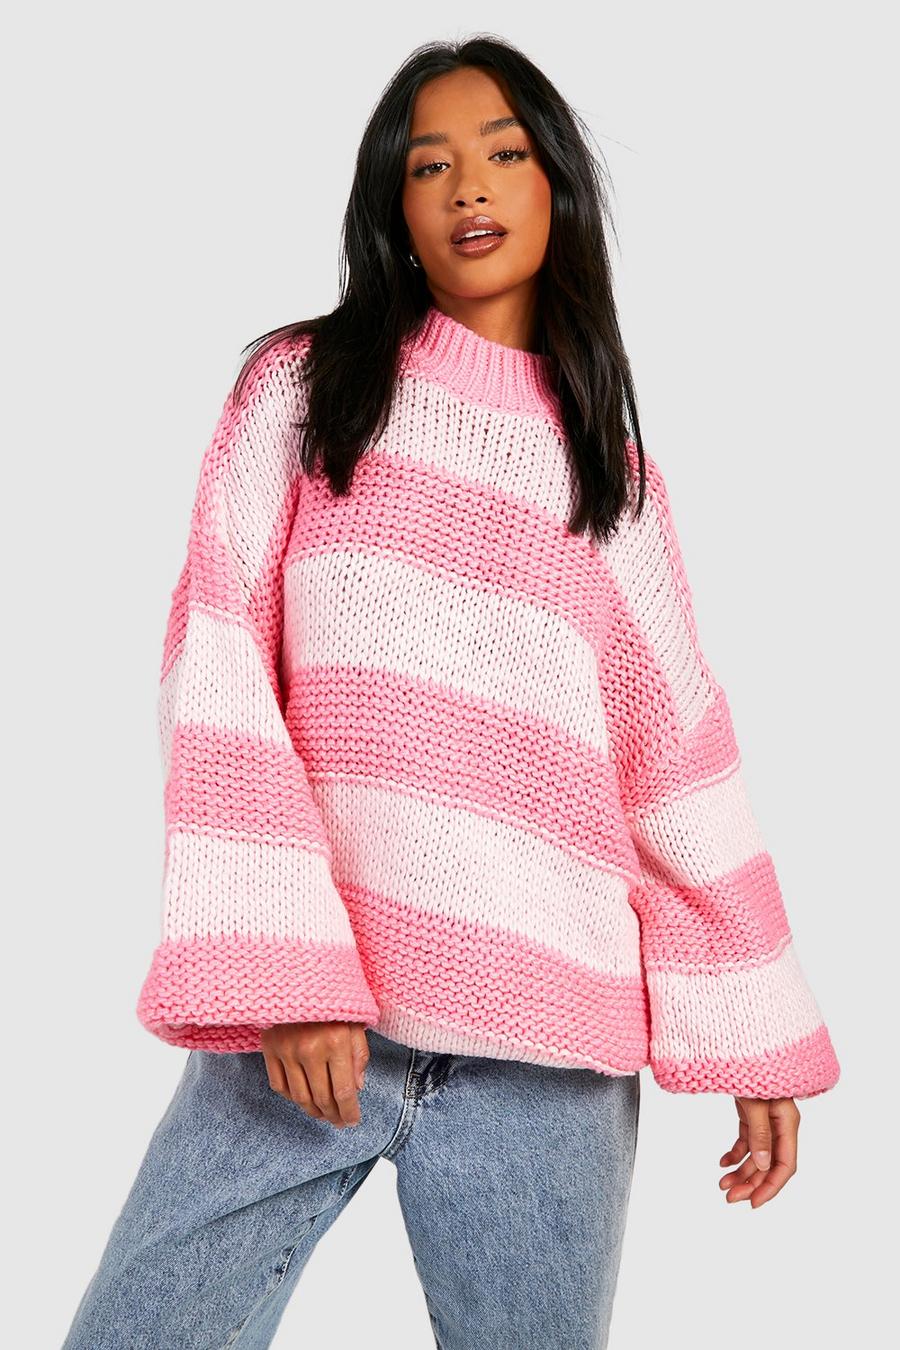 Jersey Petite oversize de punto grueso con rayas, Pink image number 1